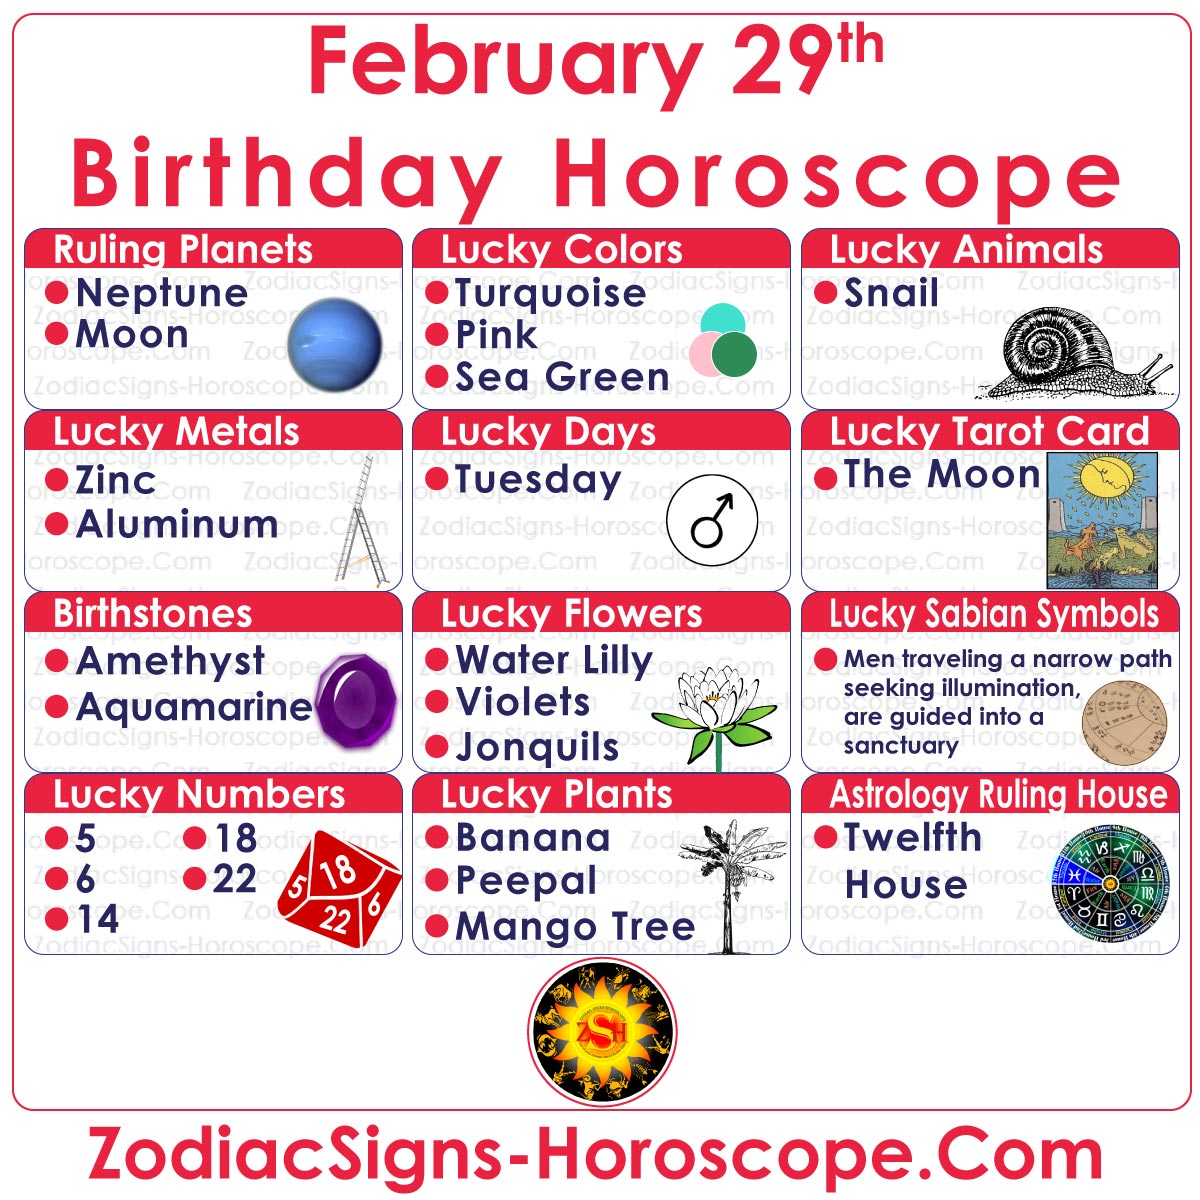 February 29 Zodiac Lucky Numbers, Days, Colors and more